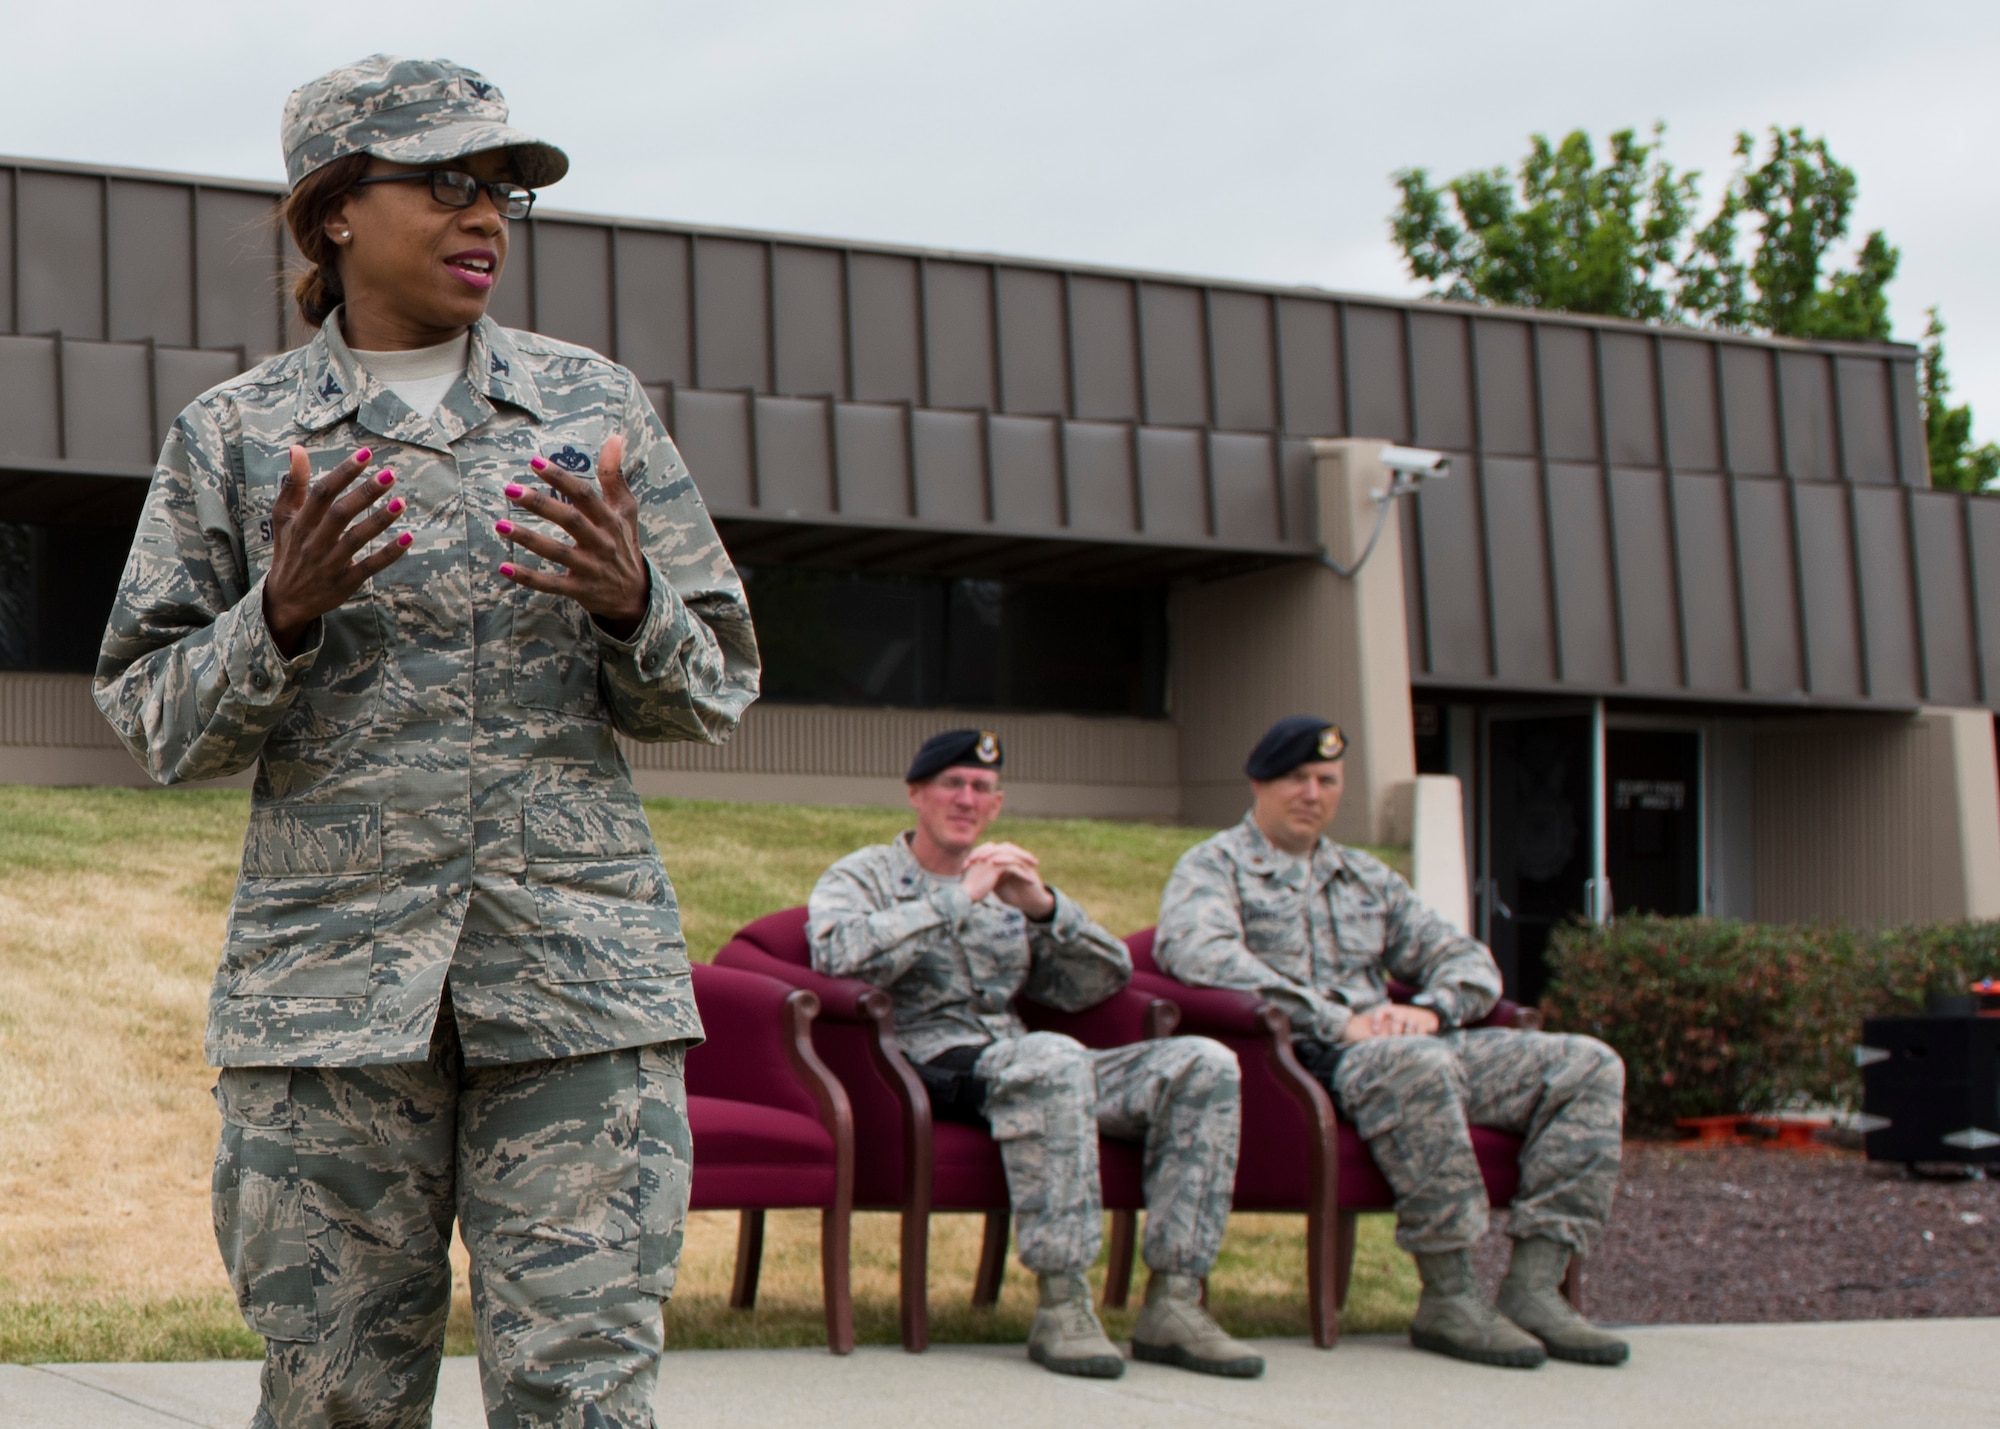 Col. Yvonne Spencer, 92nd Mission Support Group commander, bids farewell to Lt. Col. Kevin McMahon and welcomes Maj. Cameron Maher as the new 92nd Security Forces commander during a change of command ceremony June 8, 2017, at Fairchild Air Force, Washington. Spencer thanked McMahon for his many achevements during his term as 92nd SFS commander and then welcomed Maher and his family, offiering support from Team Fairchild as they adapt to their new home.
(U.S. Air Force Photo / Airman 1st Class Ryan Lackey)